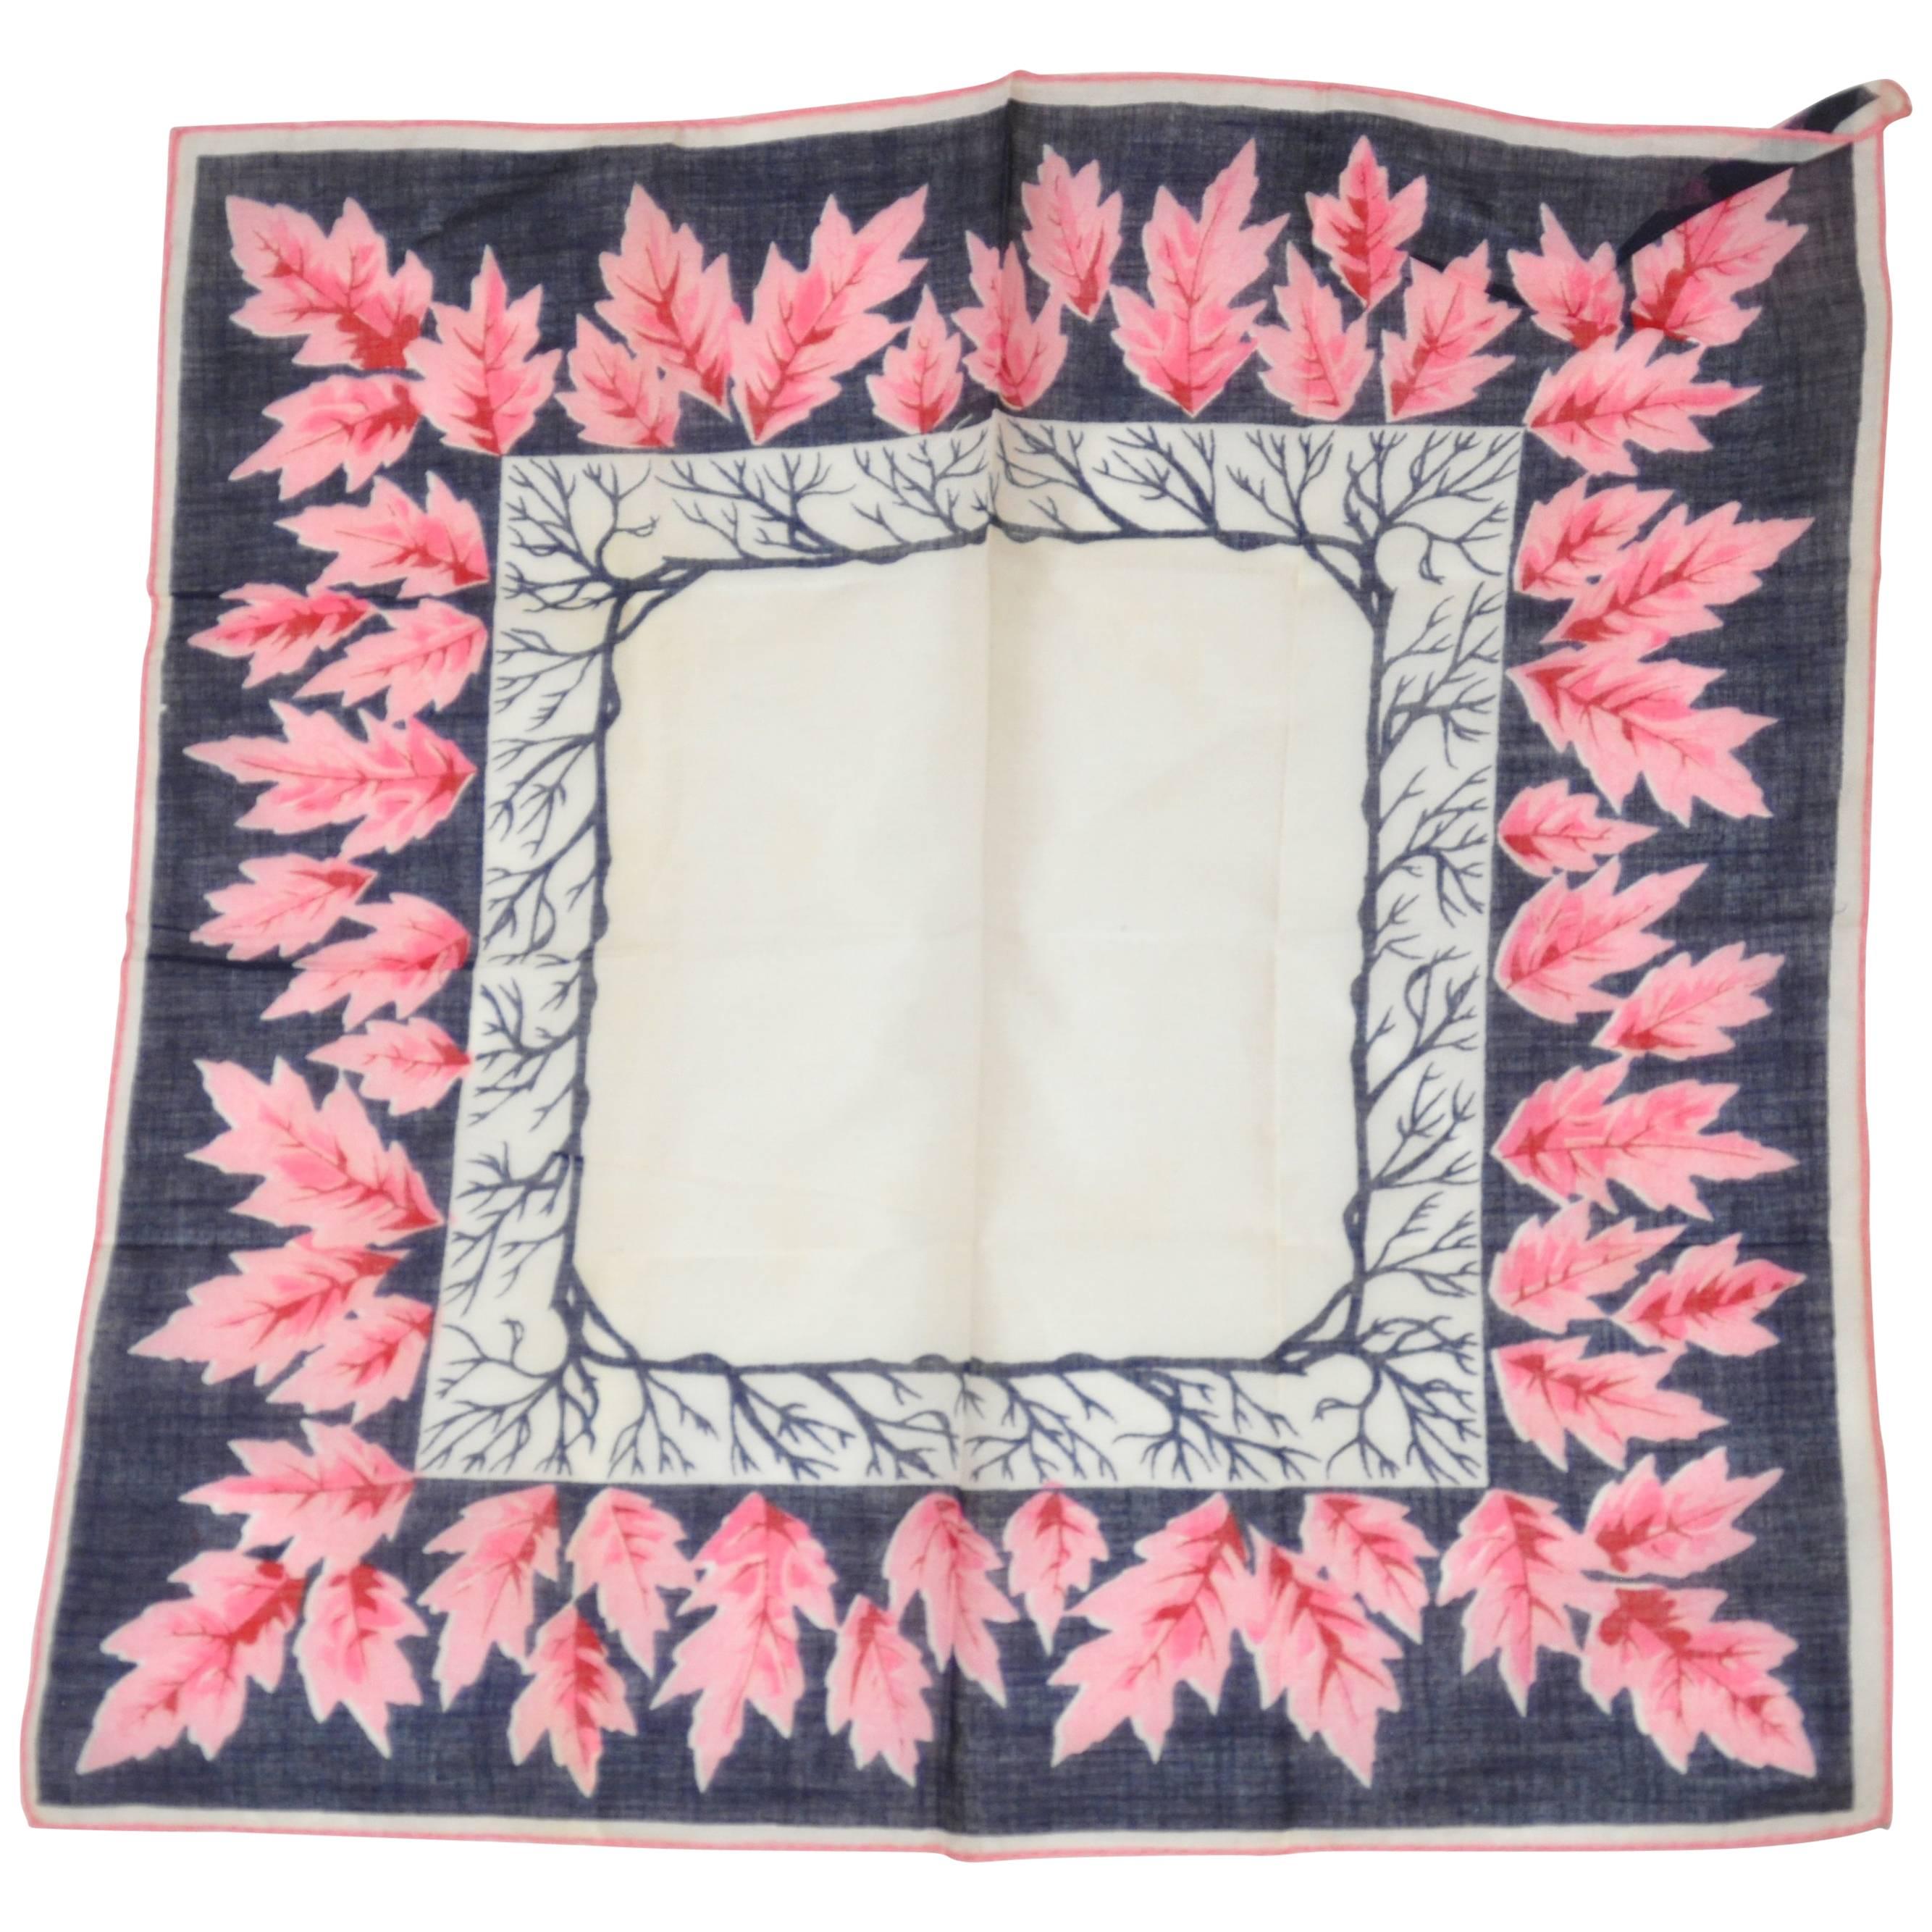 "Signs of Autumn Leaves" Swiss Cotton Handkerchief For Sale